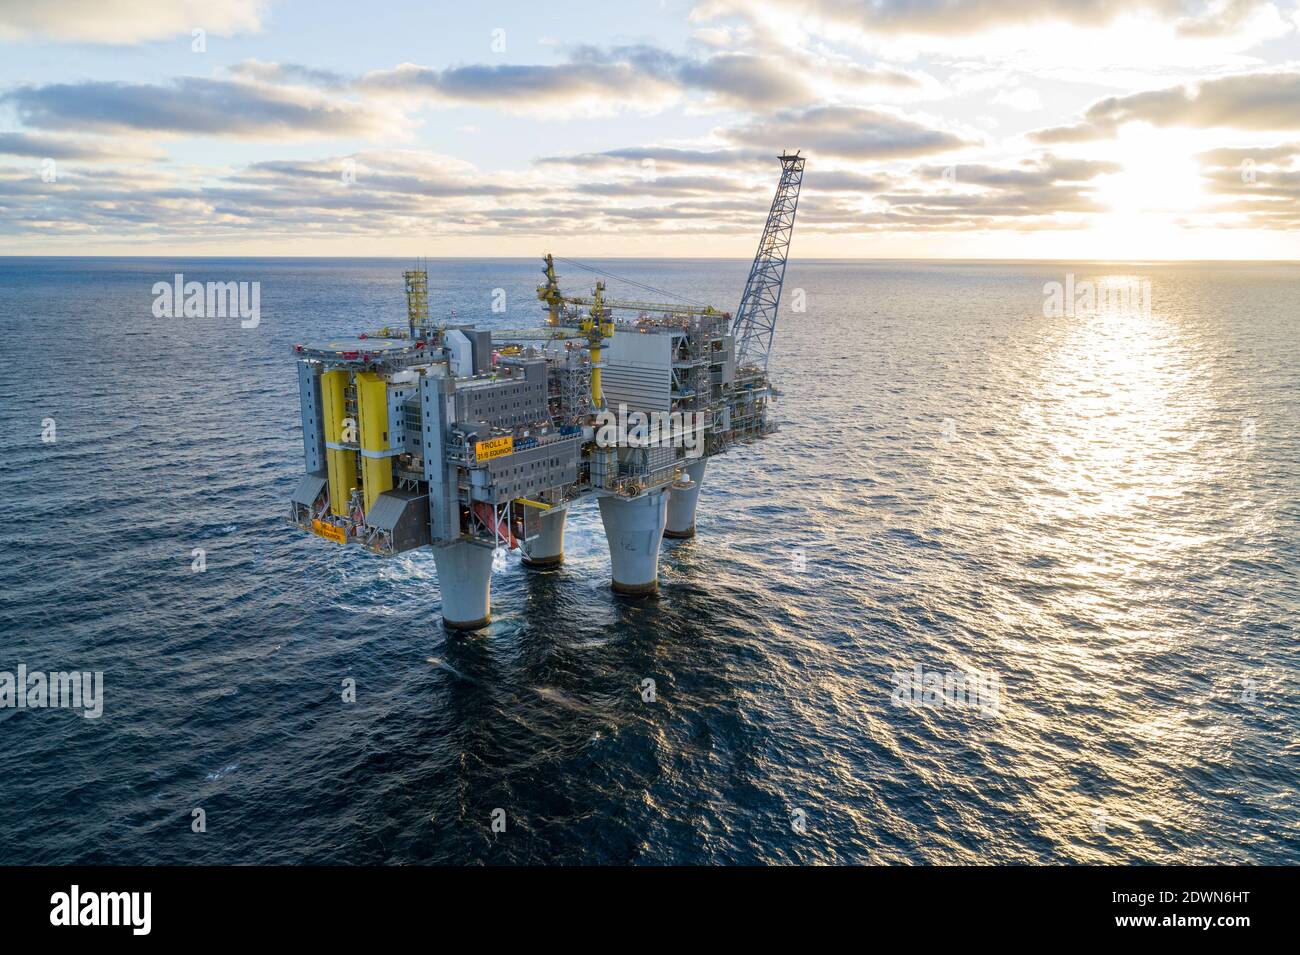 Handout photo dated August 26, 2020 of the Troll A offshore natural gas platform in the Troll gas field off the west coast of Norway. Norway's Supreme Court on Tuesday struck down a challenge from environmental groups trying to stop oil exploration in the Arctic, after a historic battle over the country's climate change commitments. By a vote of 11 to four, the top court rejected the argument of two organisations, Greenpeace and Young Friends of the Earth Norway, which said that the granting of 10 oil exploration licences in the Barents Sea in 2016 was unconstitutional. Photo via ABACAPRESS.CO Stock Photo